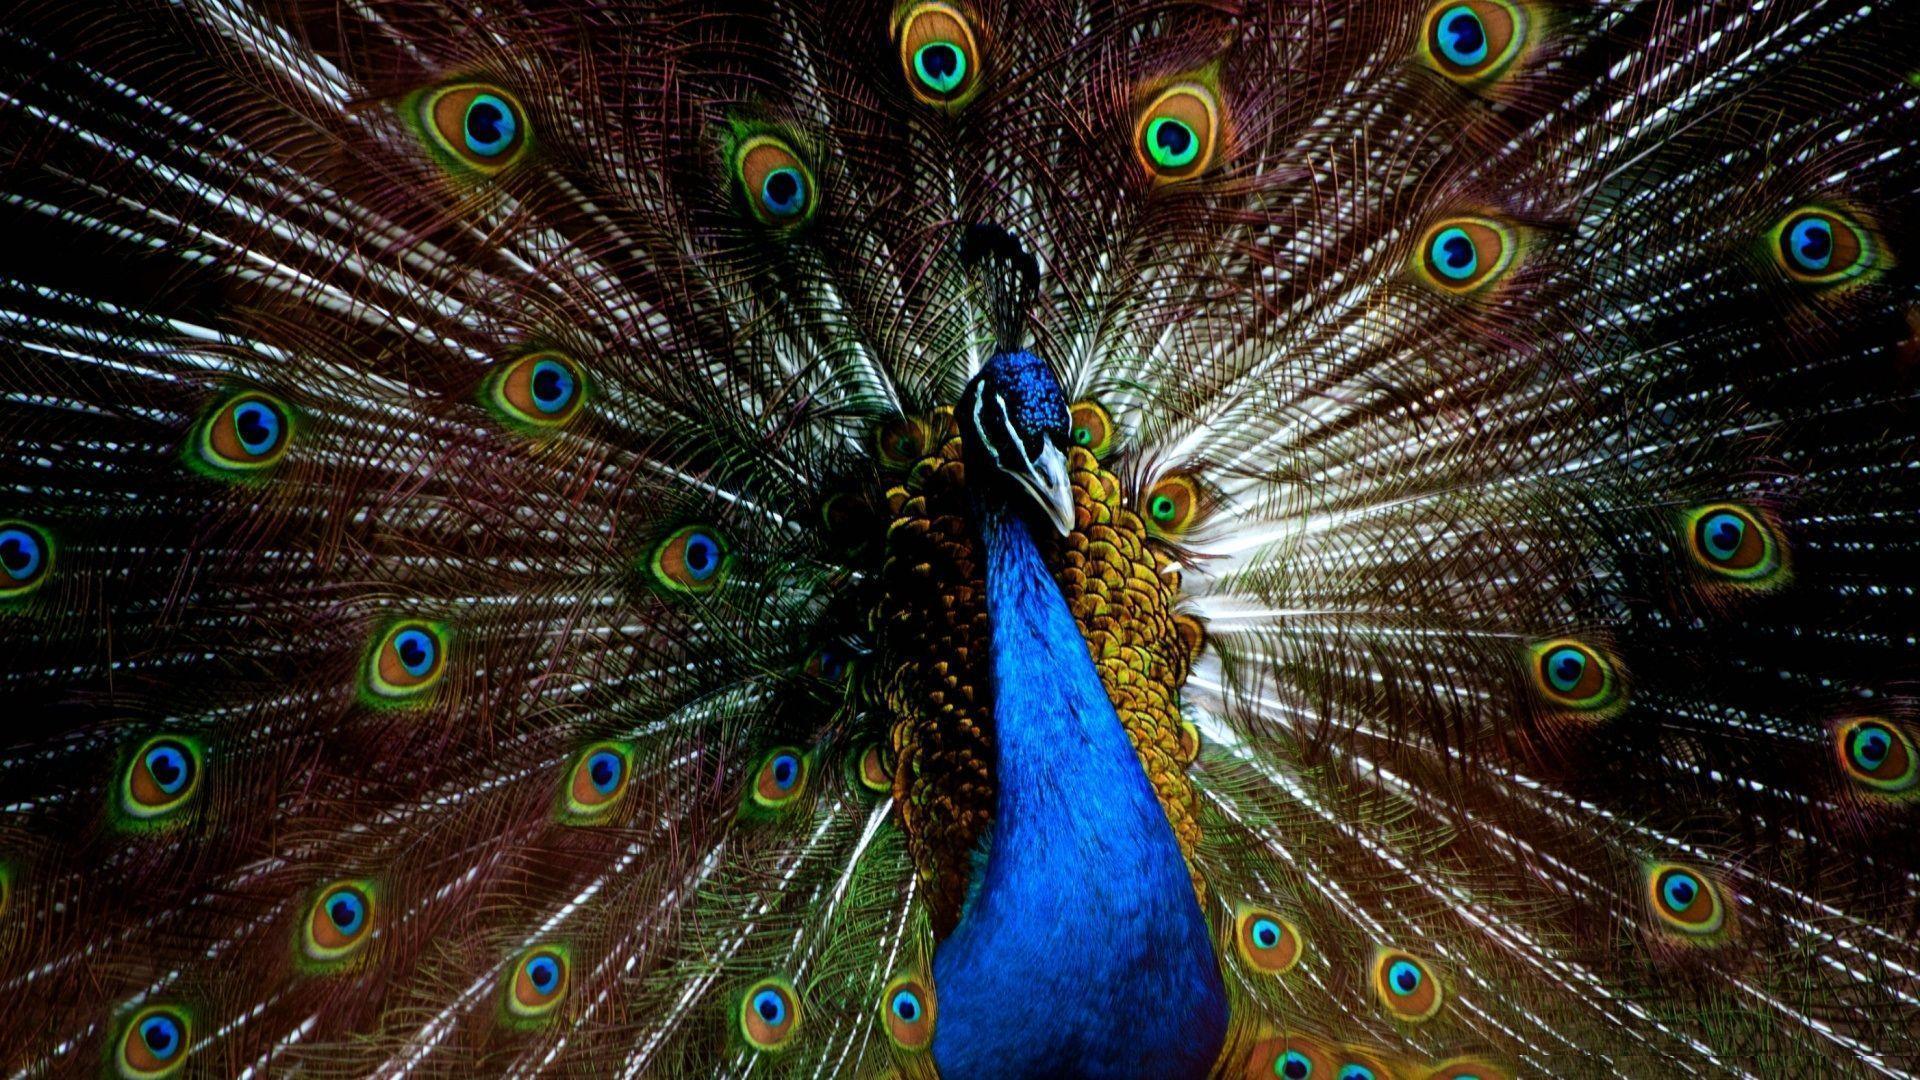 Download Peacock Feathers Wallpapers Free